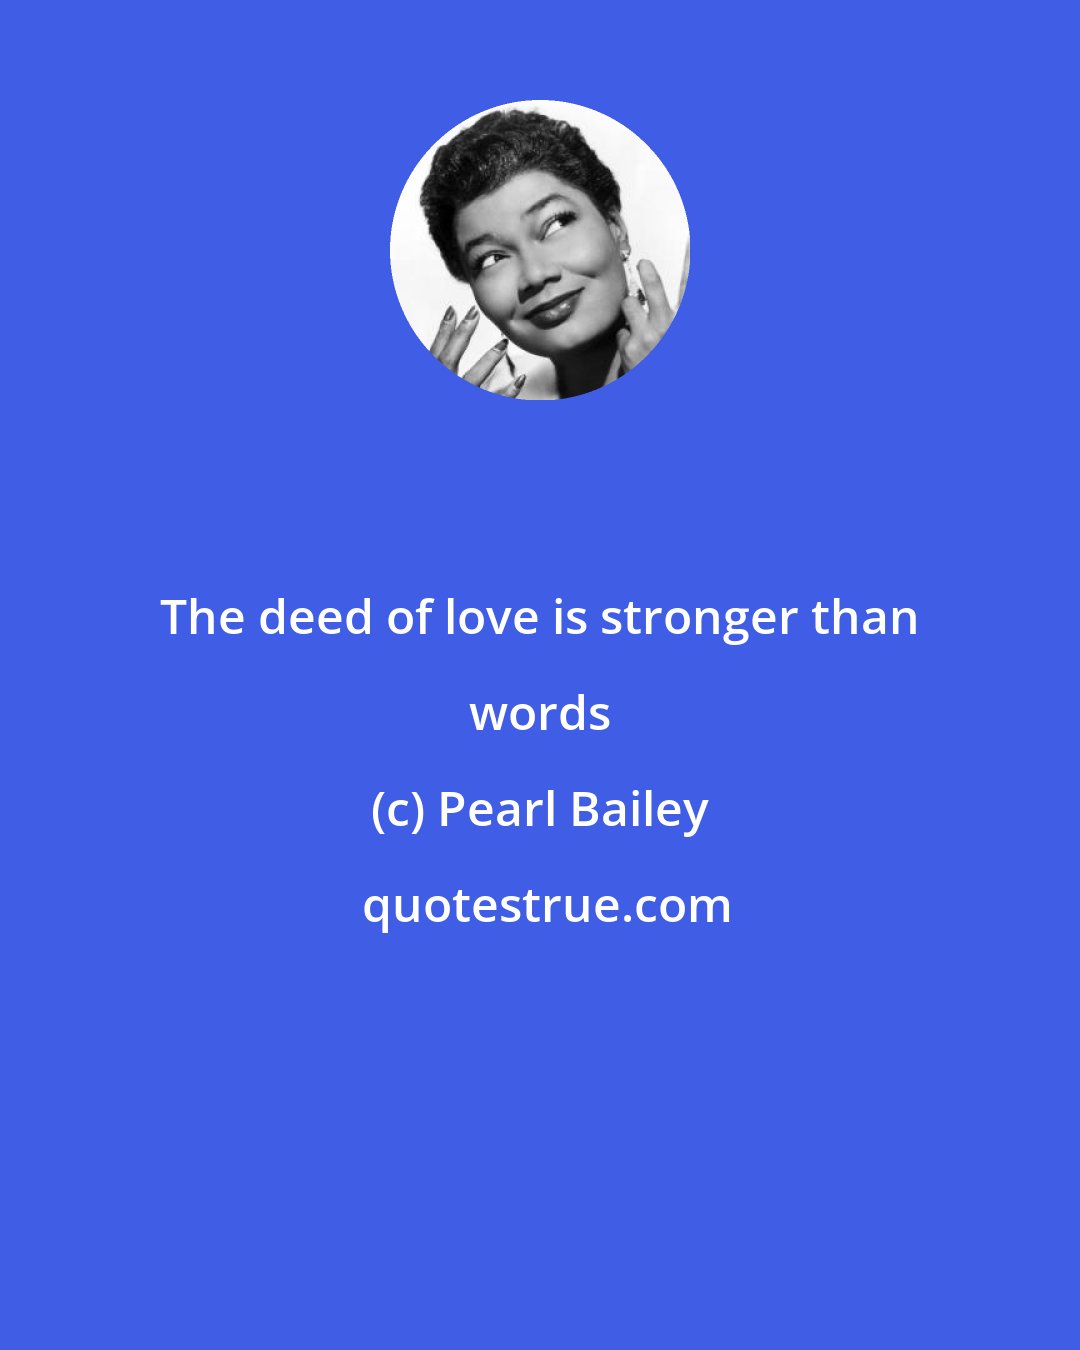 Pearl Bailey: The deed of love is stronger than words